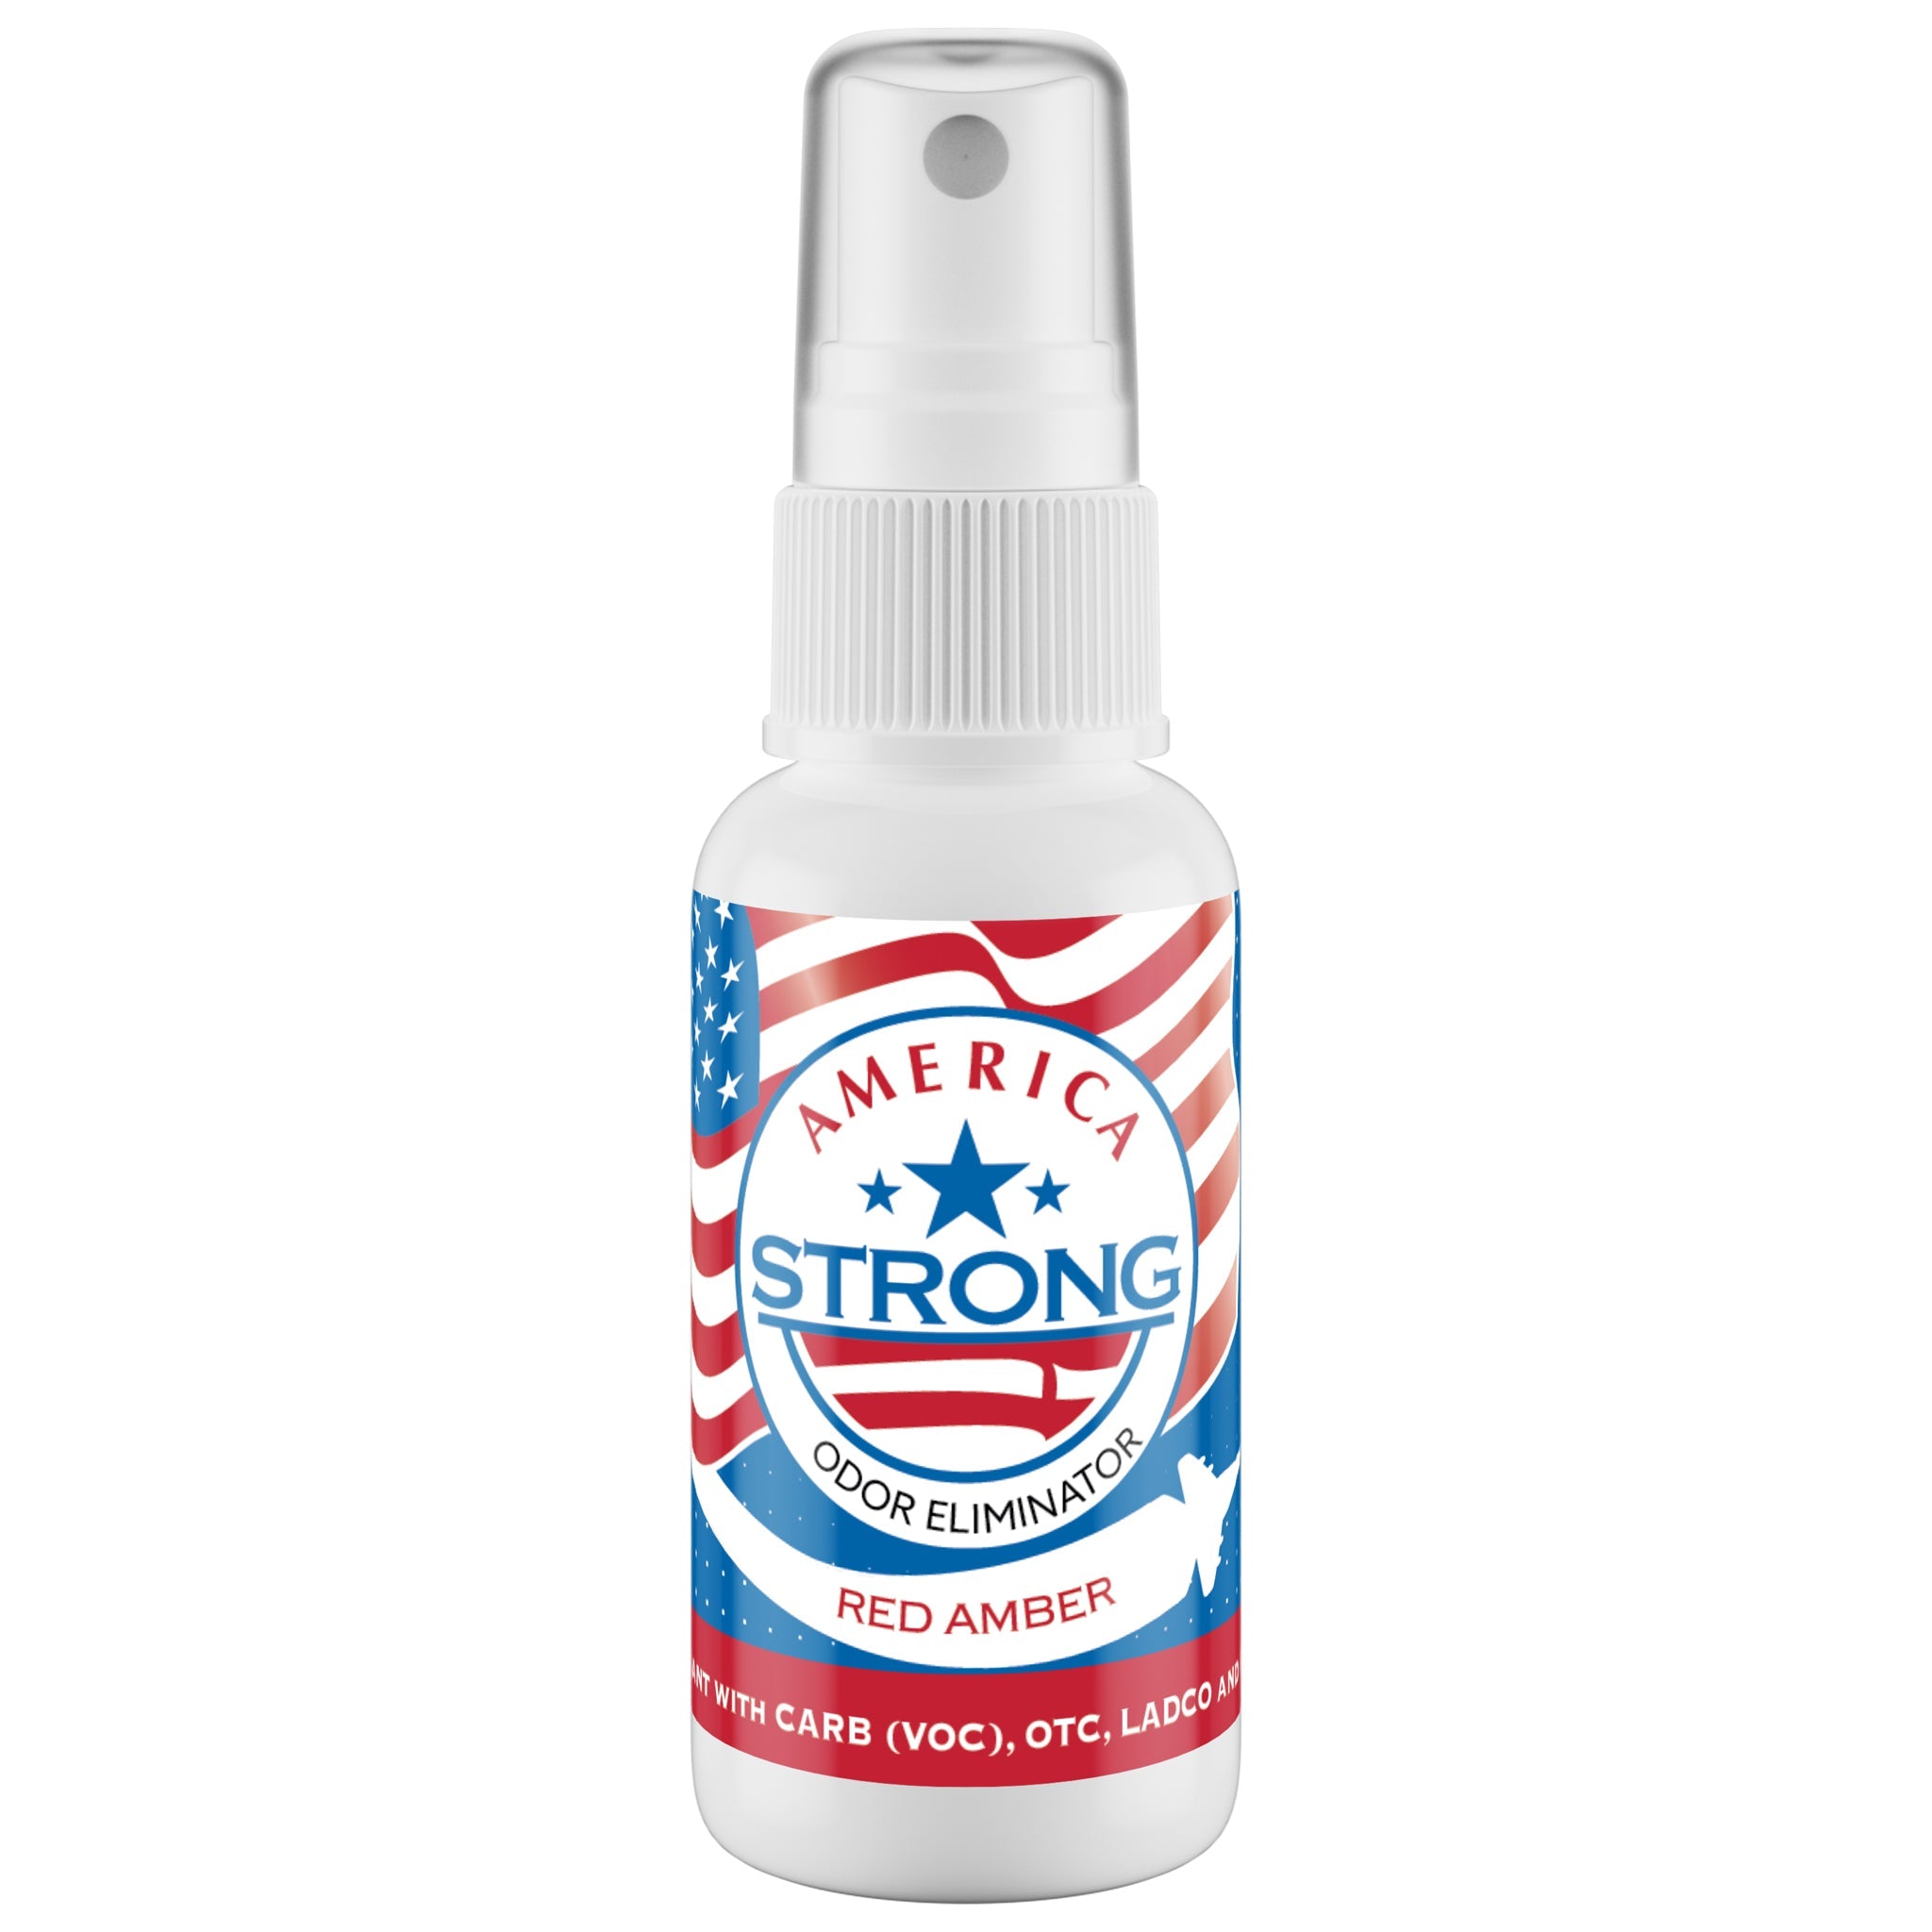 America Strong Odor Eliminator - Red Amber Scent Size: 1.5oz